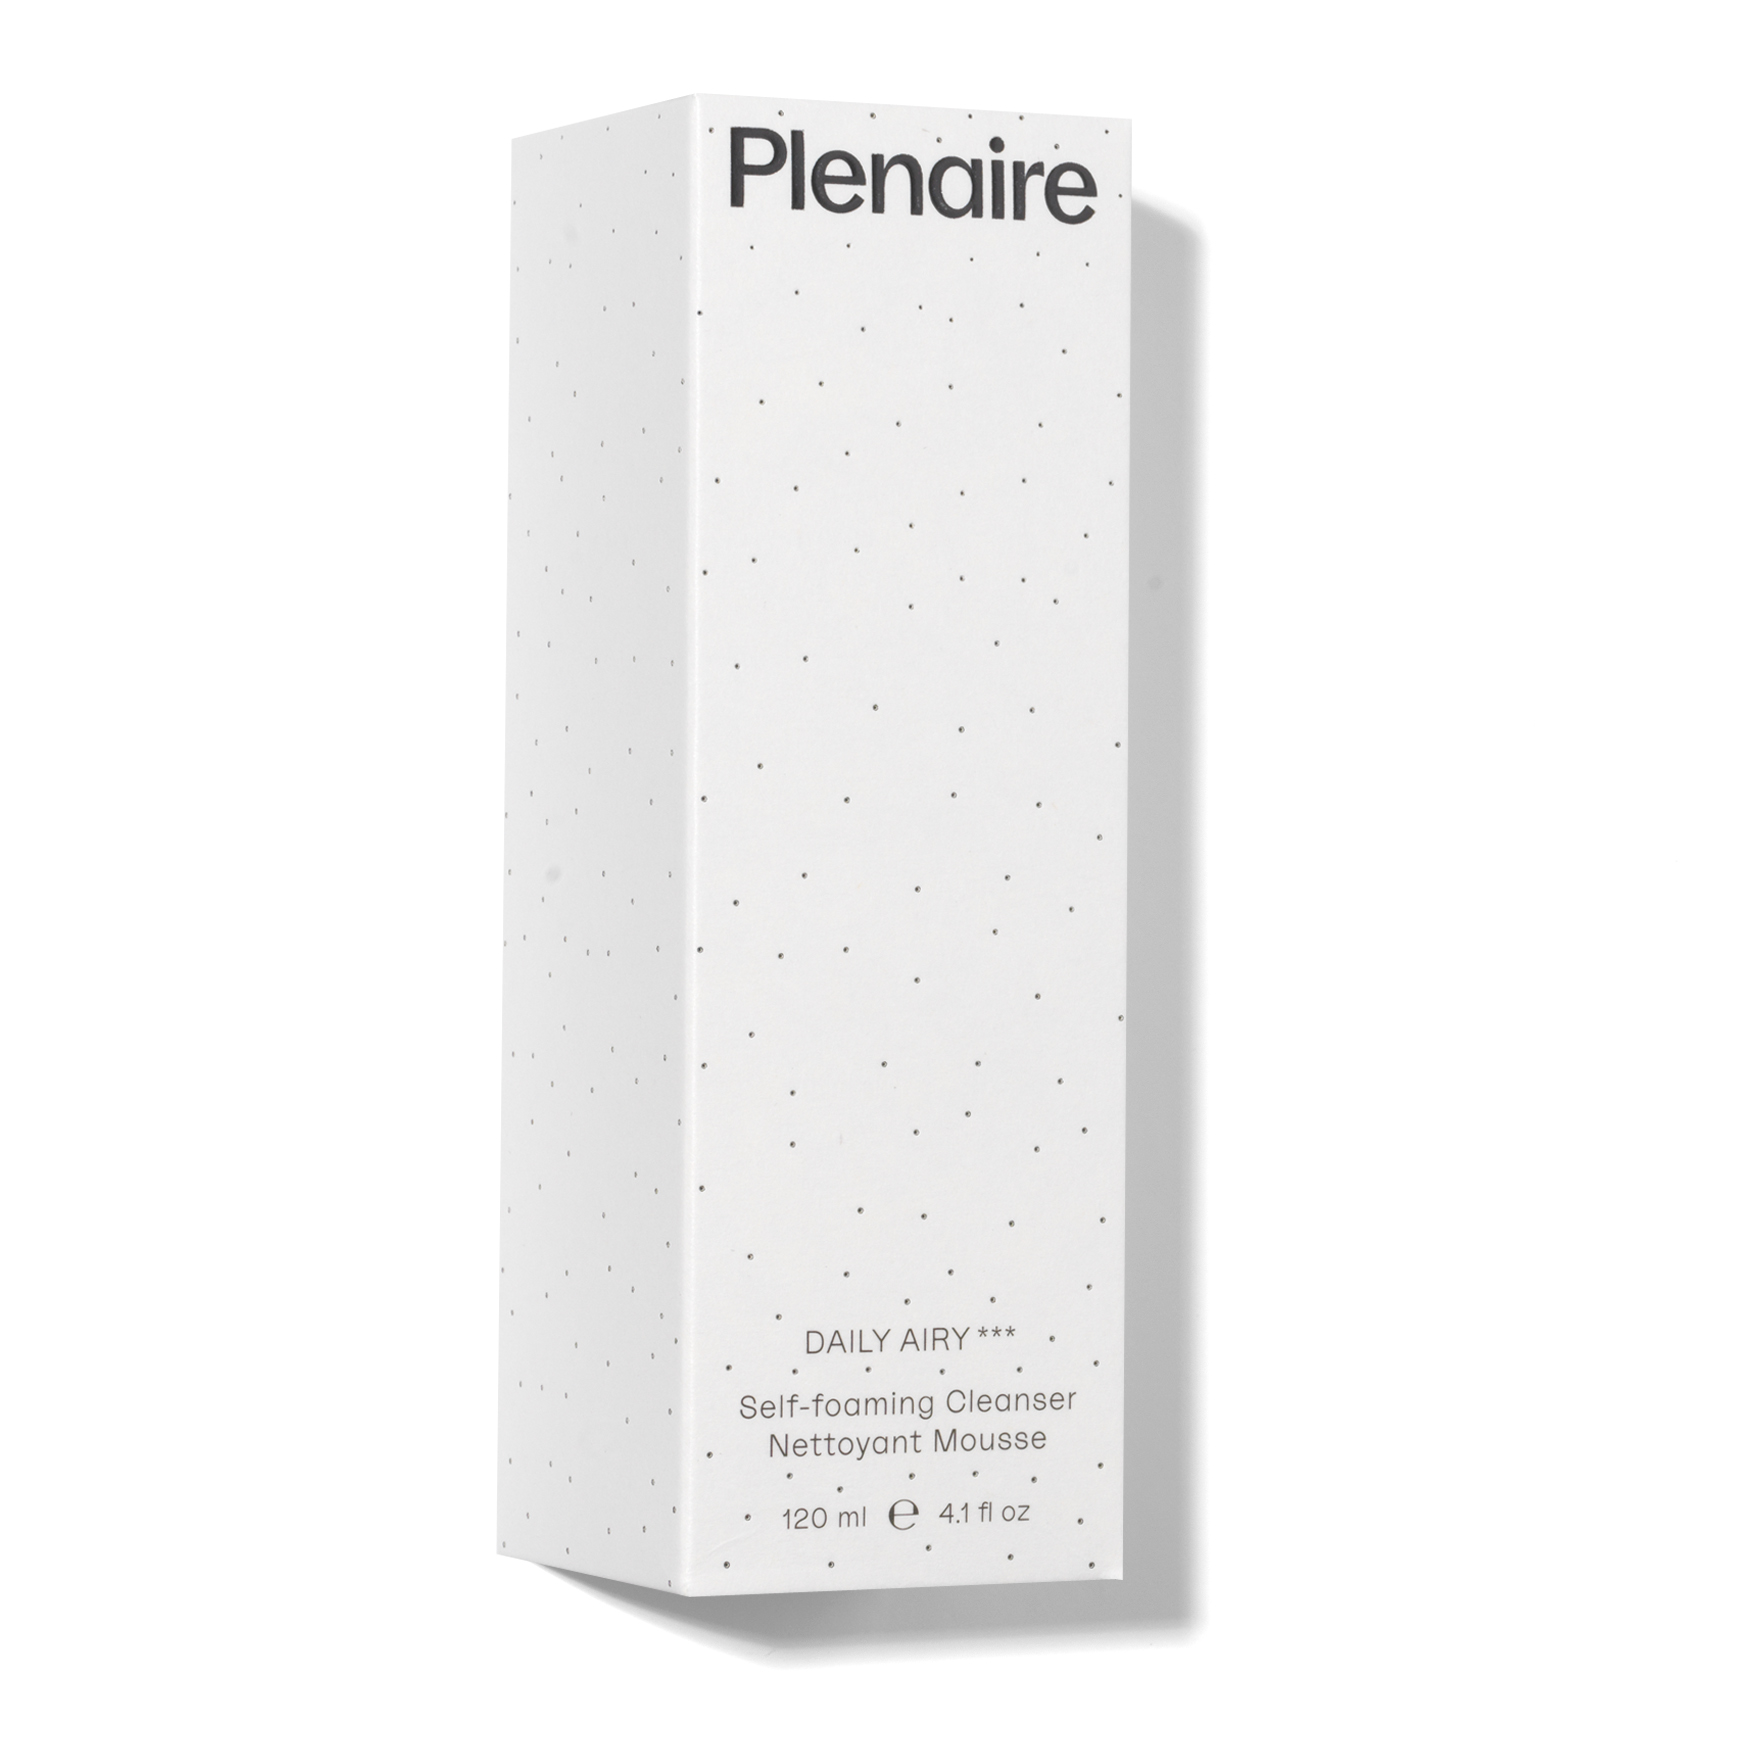 Plenaire Daily Airy Foaming Cleanser | Space NK